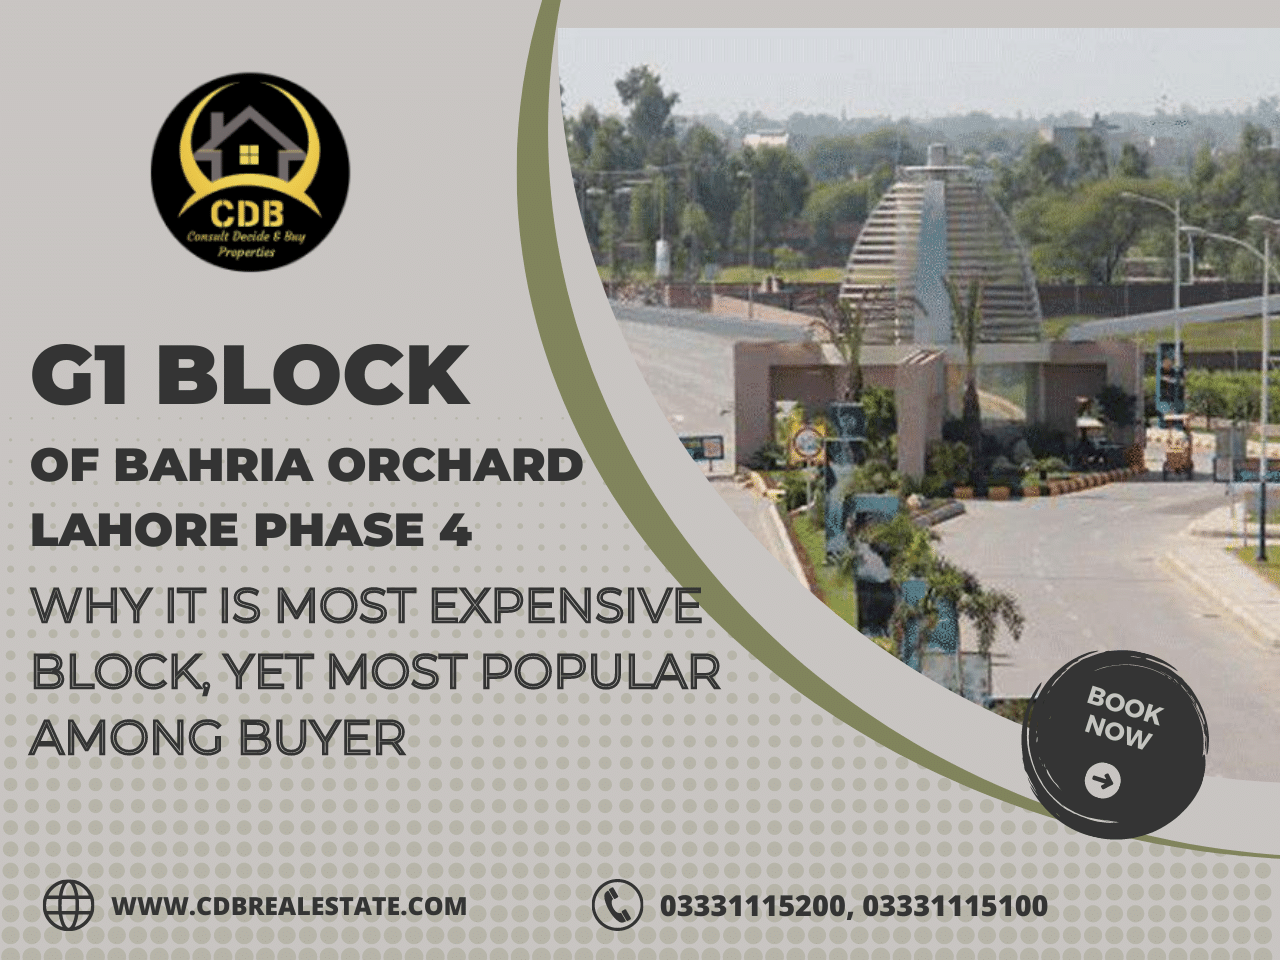 G1 Block Of Bahria Orchard Lahore Phase 4